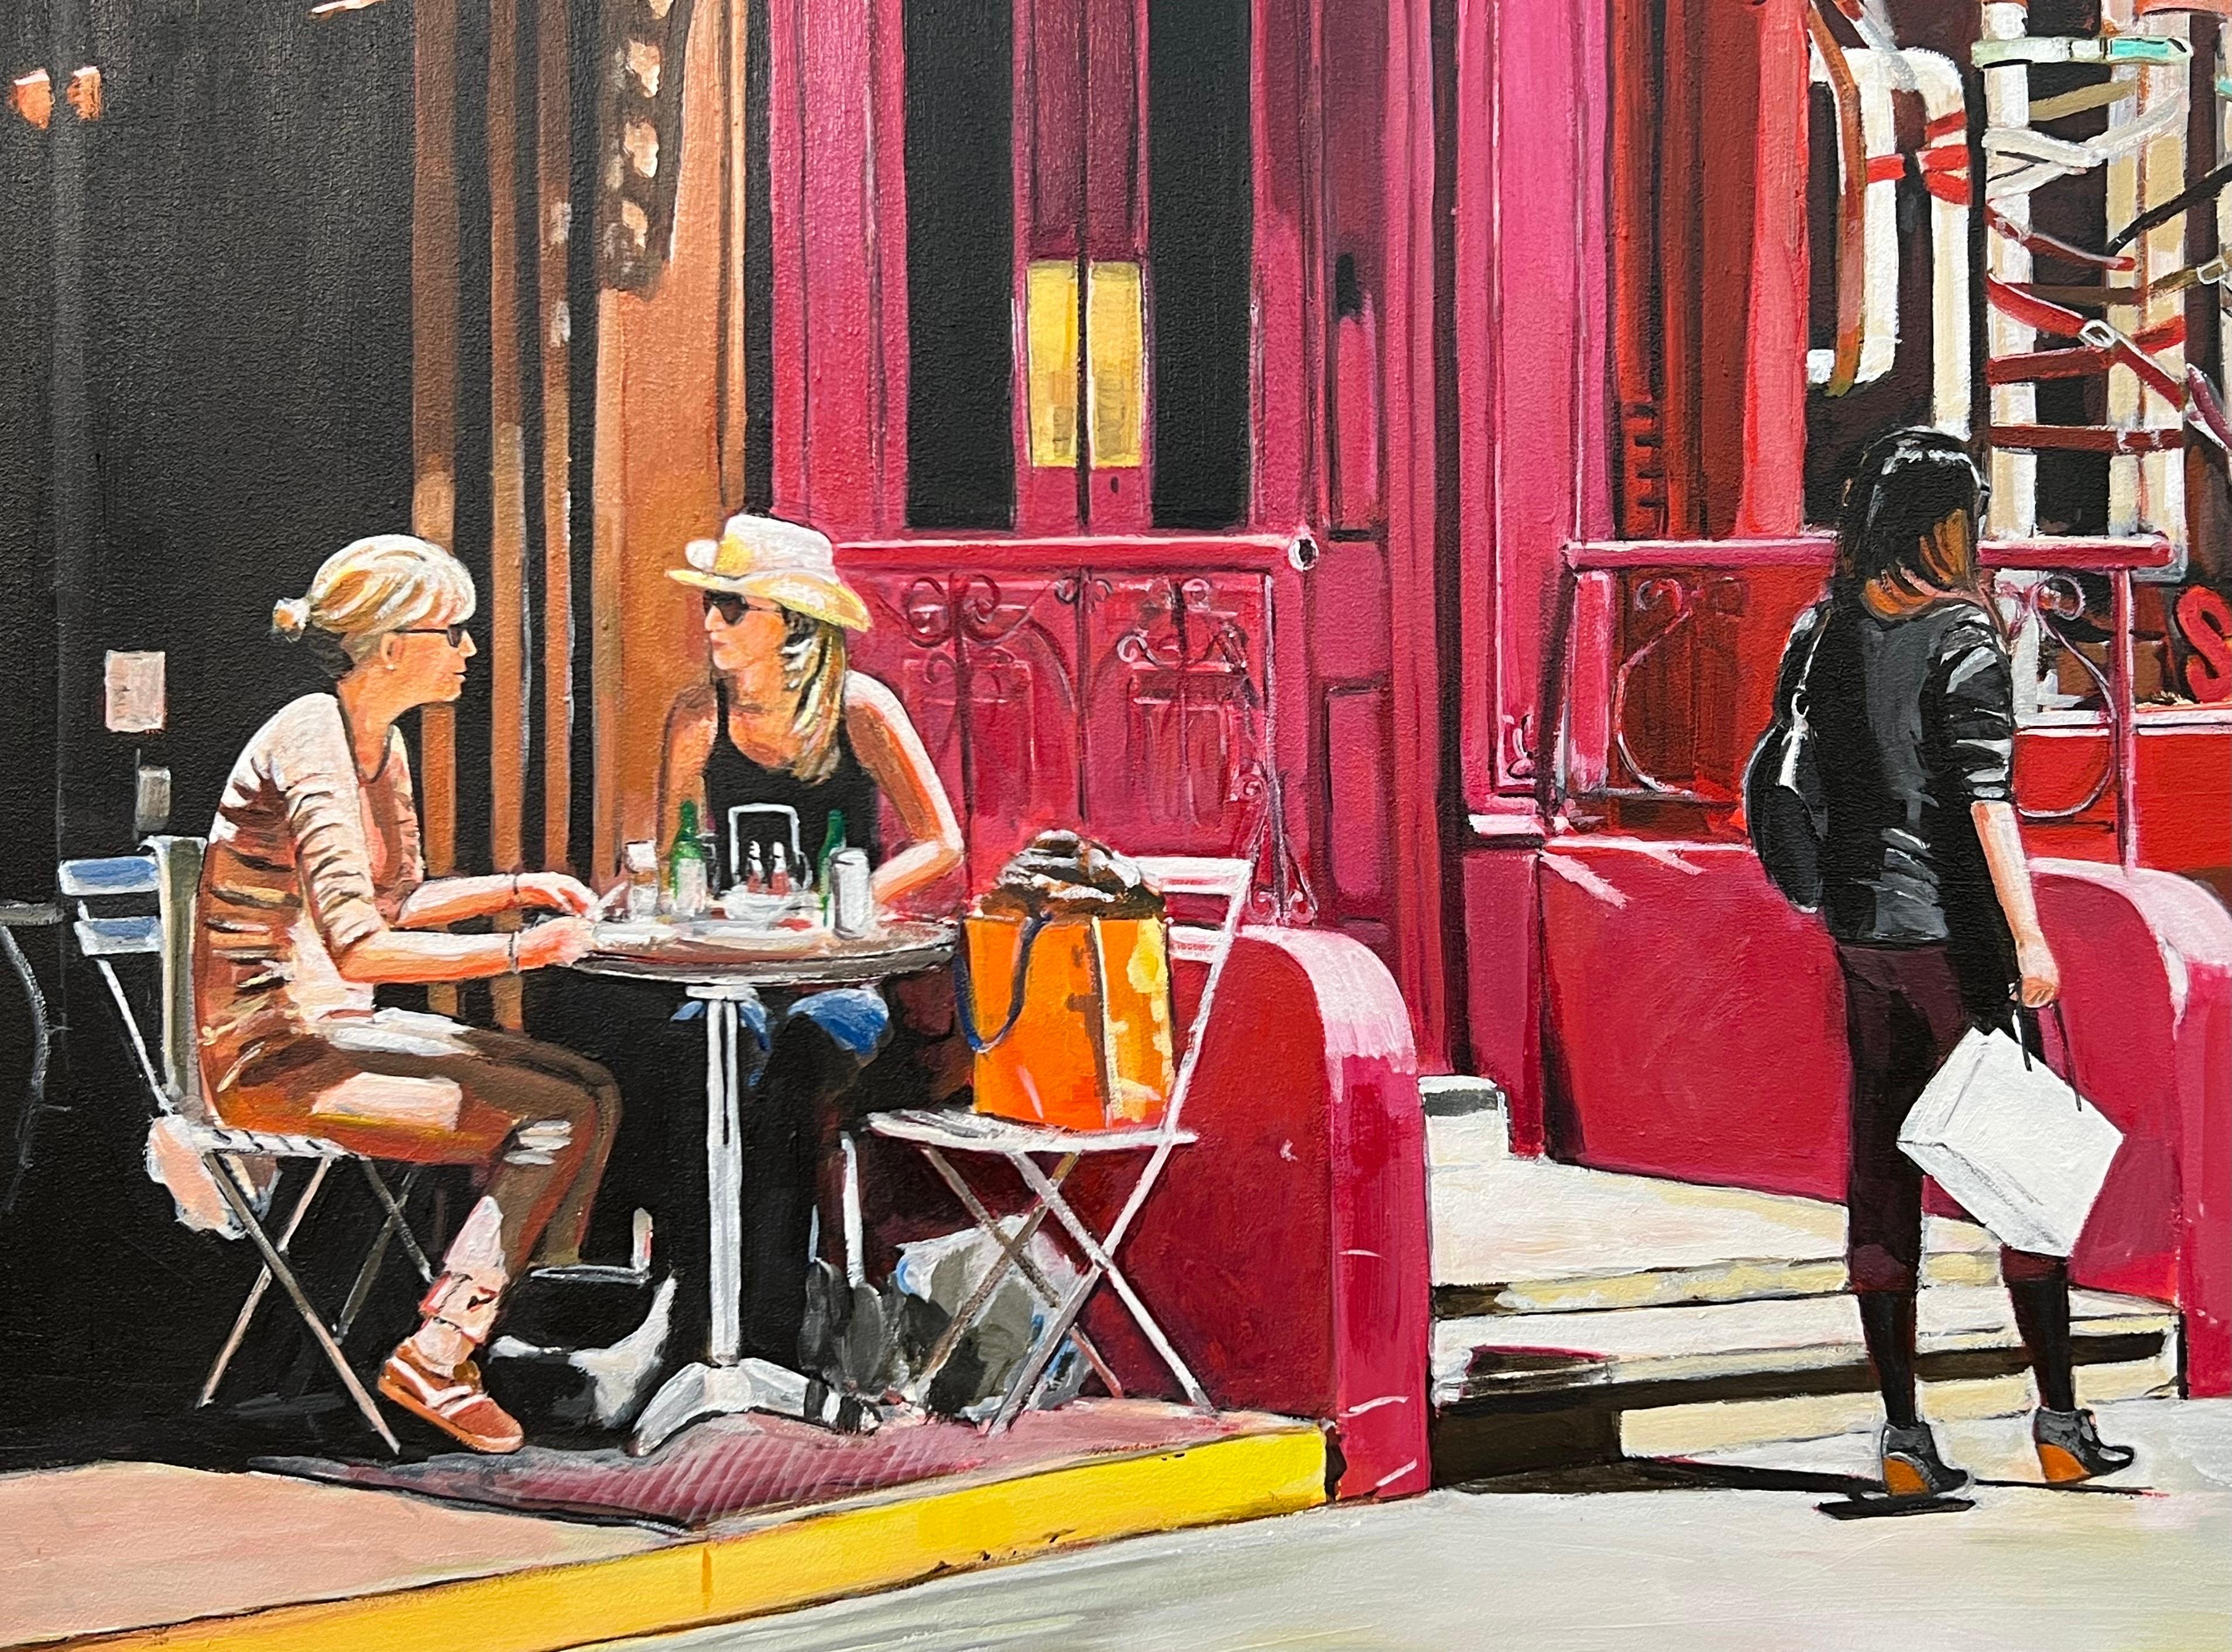 New York City Cafe Borgia with Female Figures by Contemporary British Artist - Young British Artists (YBA) Painting by Angela Wakefield